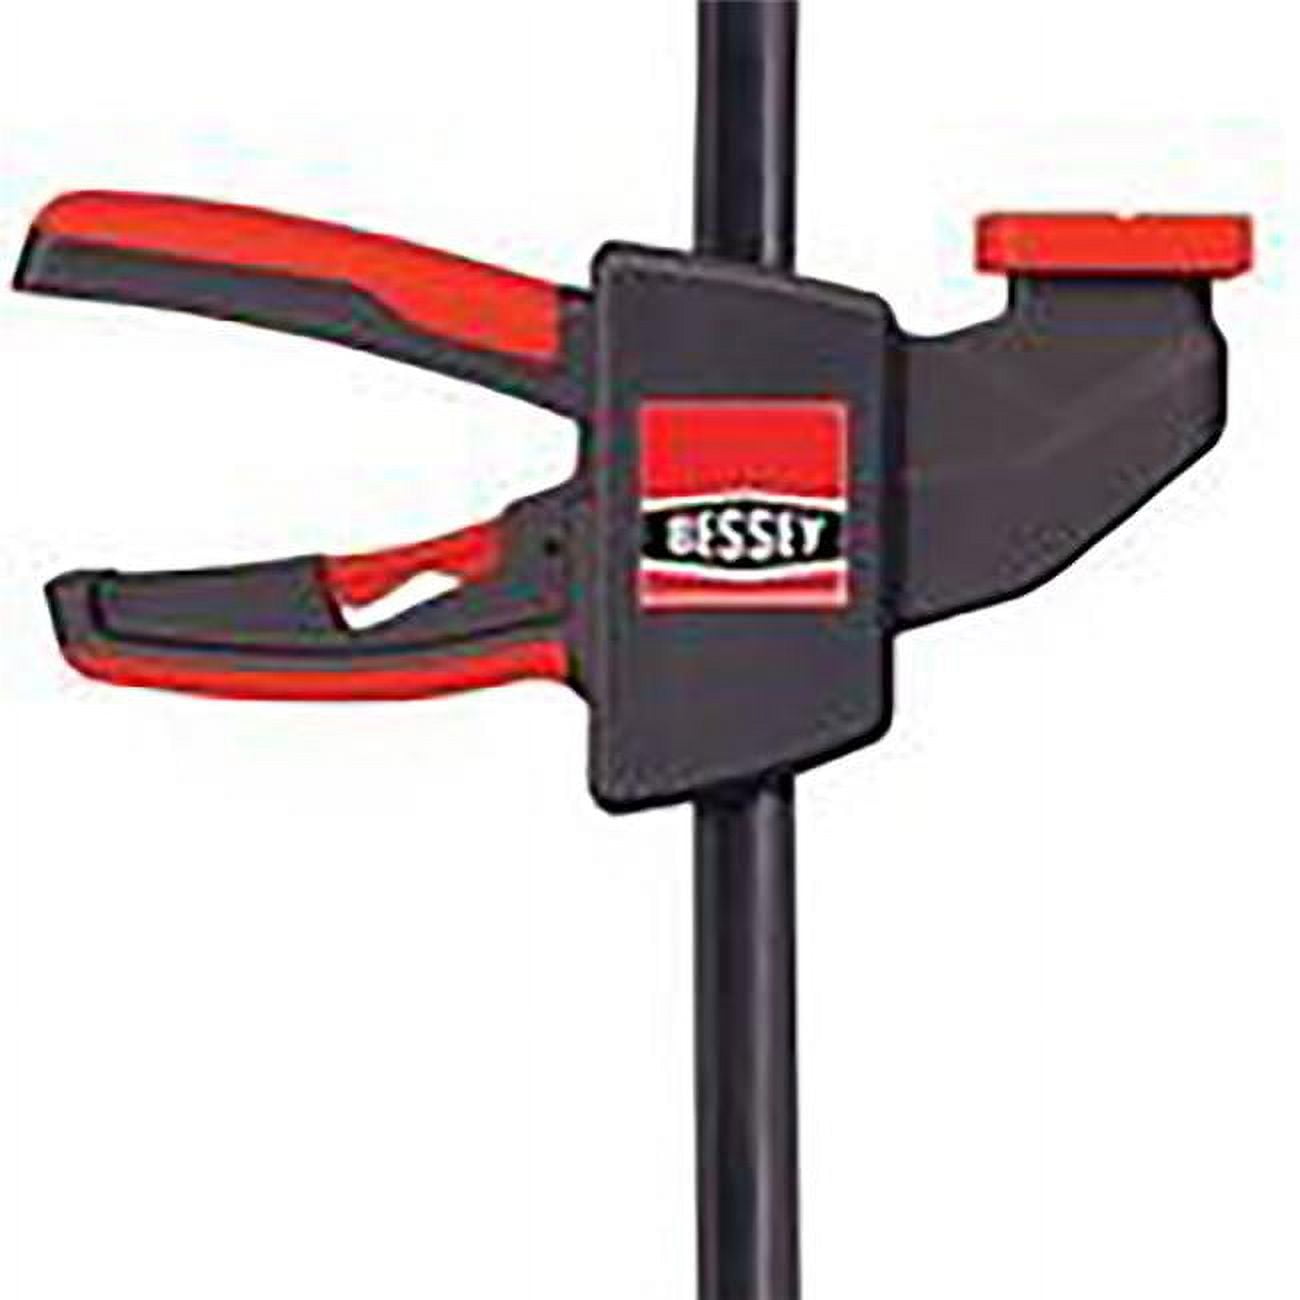 Picture of Bessey 2007079 6 x 2.375 in. 100 lbs EHK Trigger Clamp